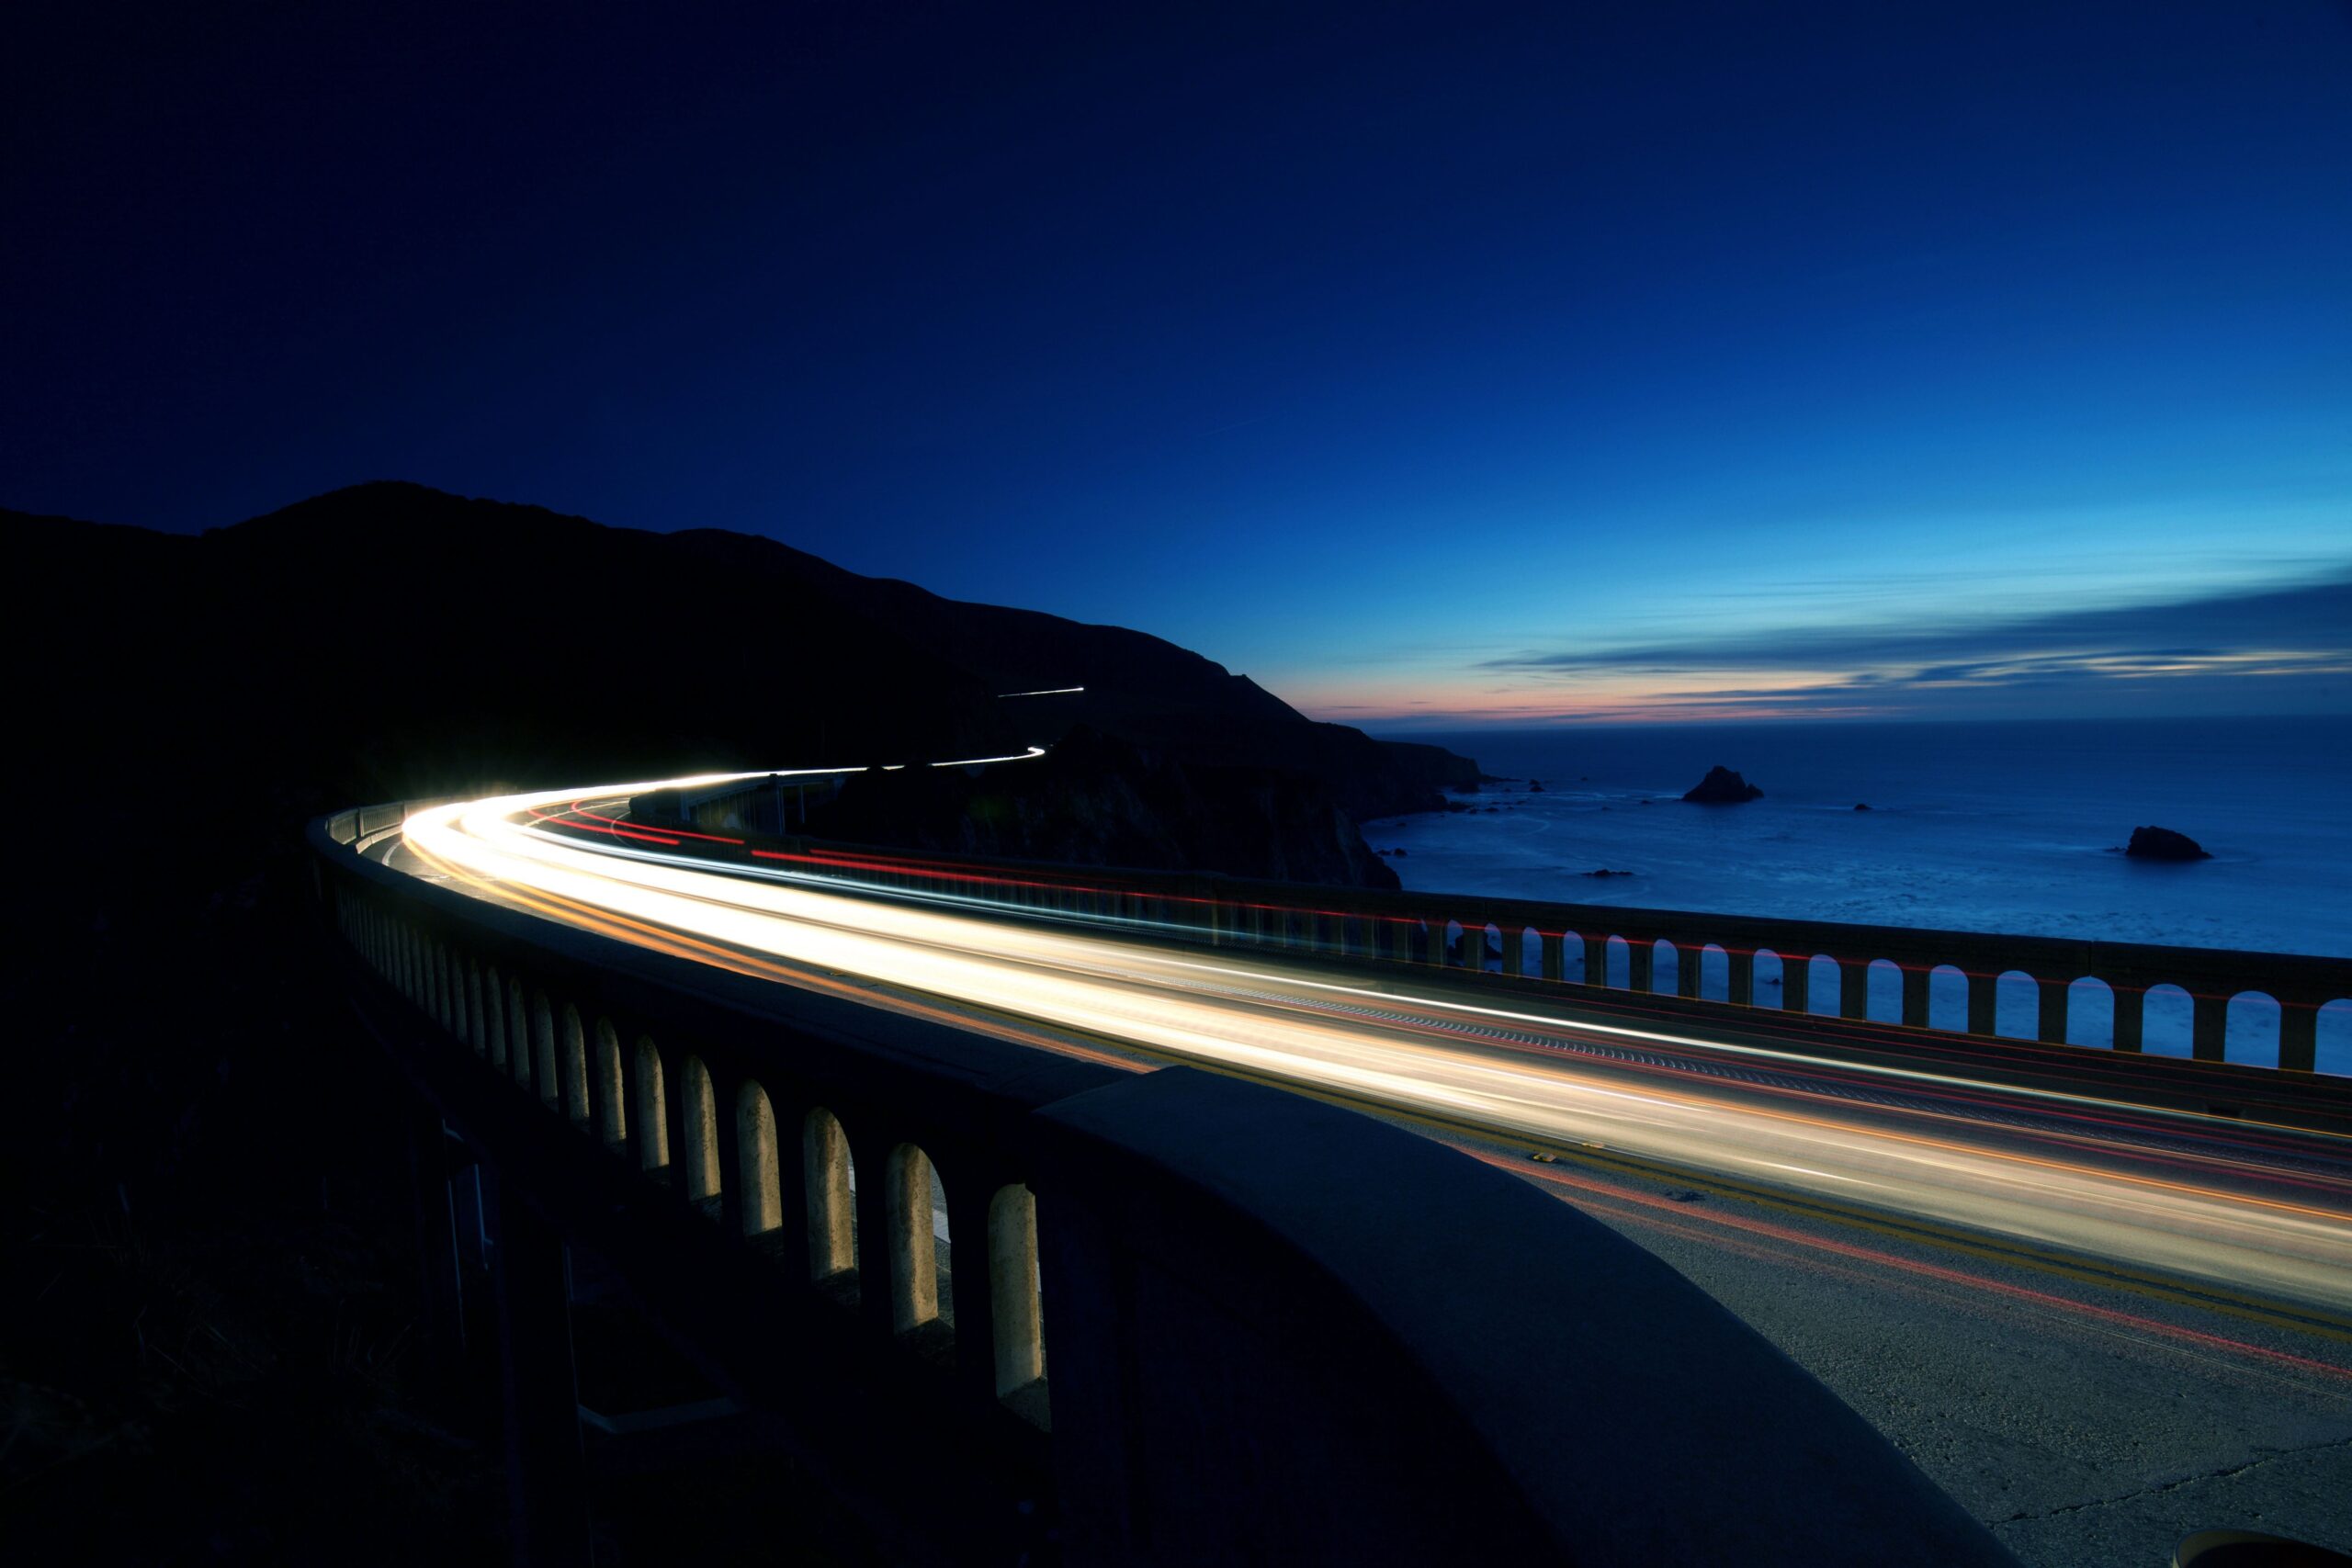 Cars speeding along a highway by the sea at night